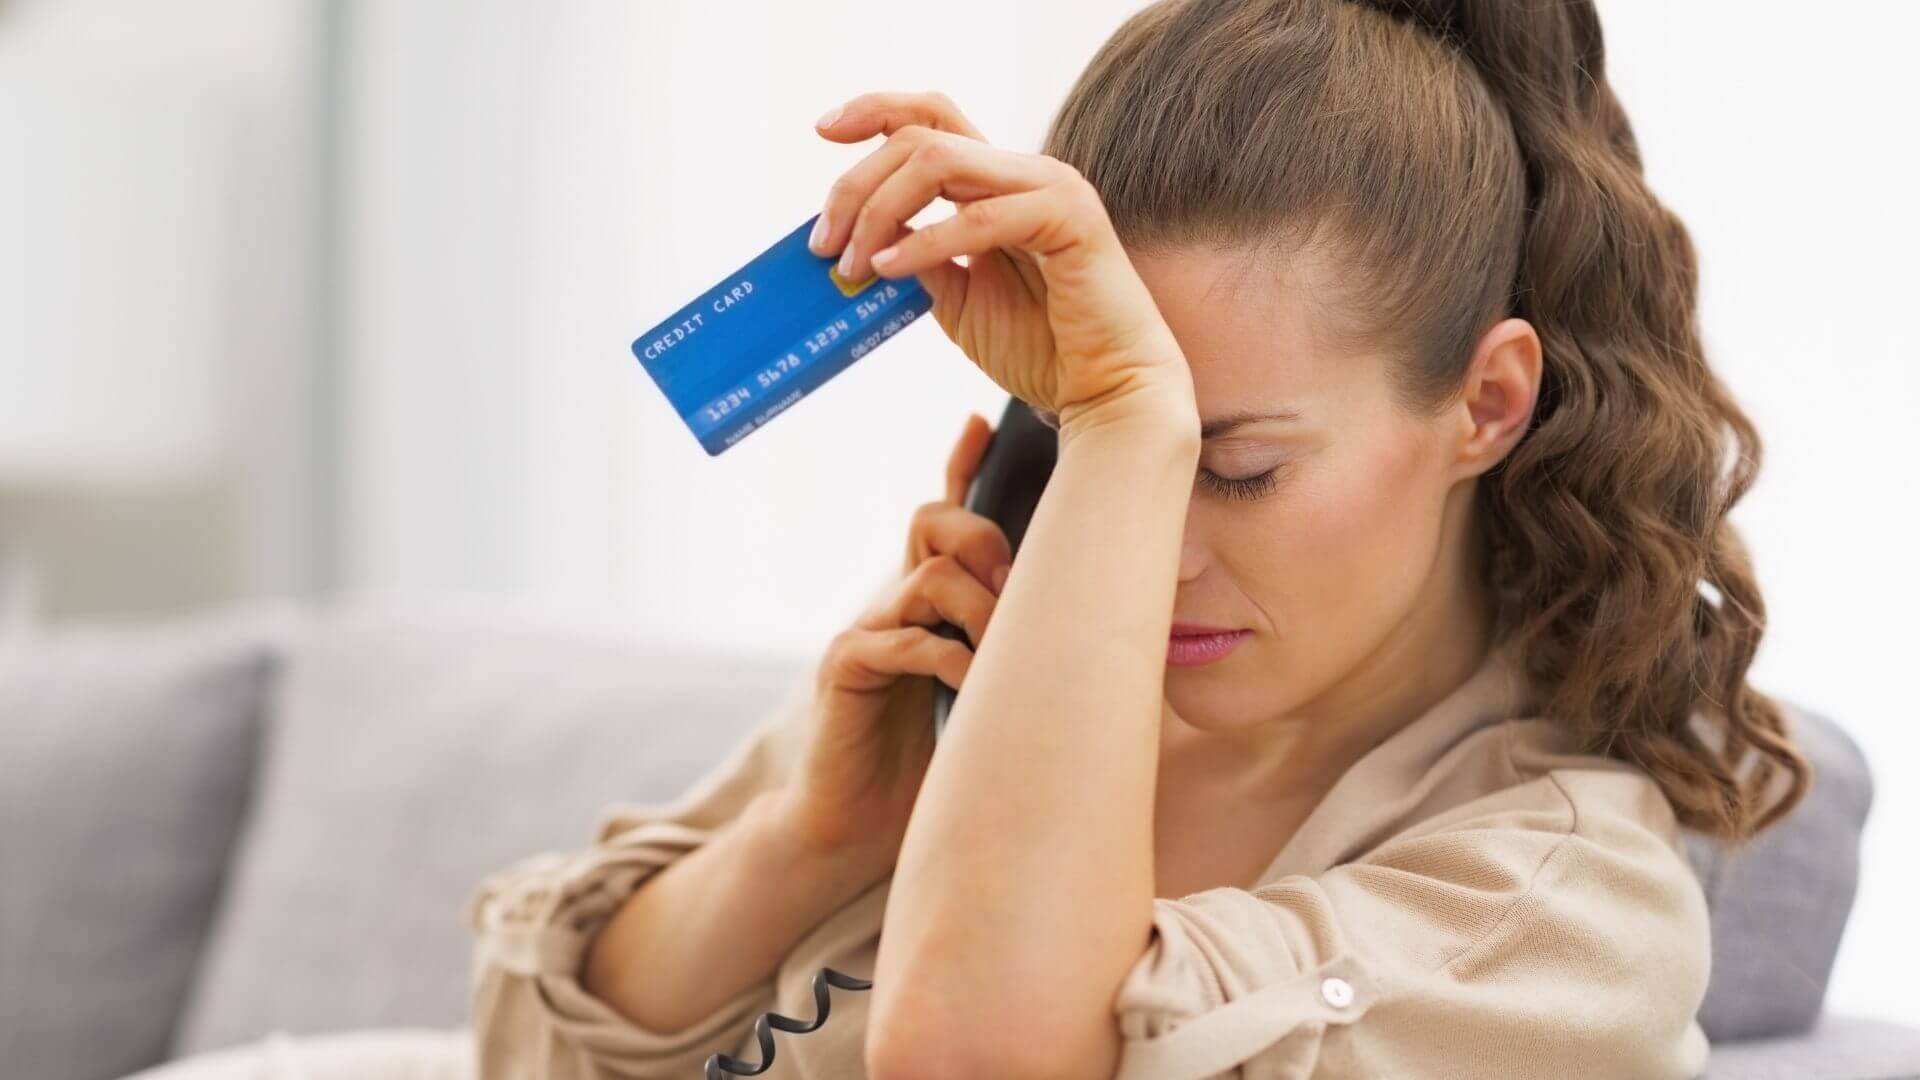 Woman looking discouraged because she can't pay a credit card bill making only $16k/year